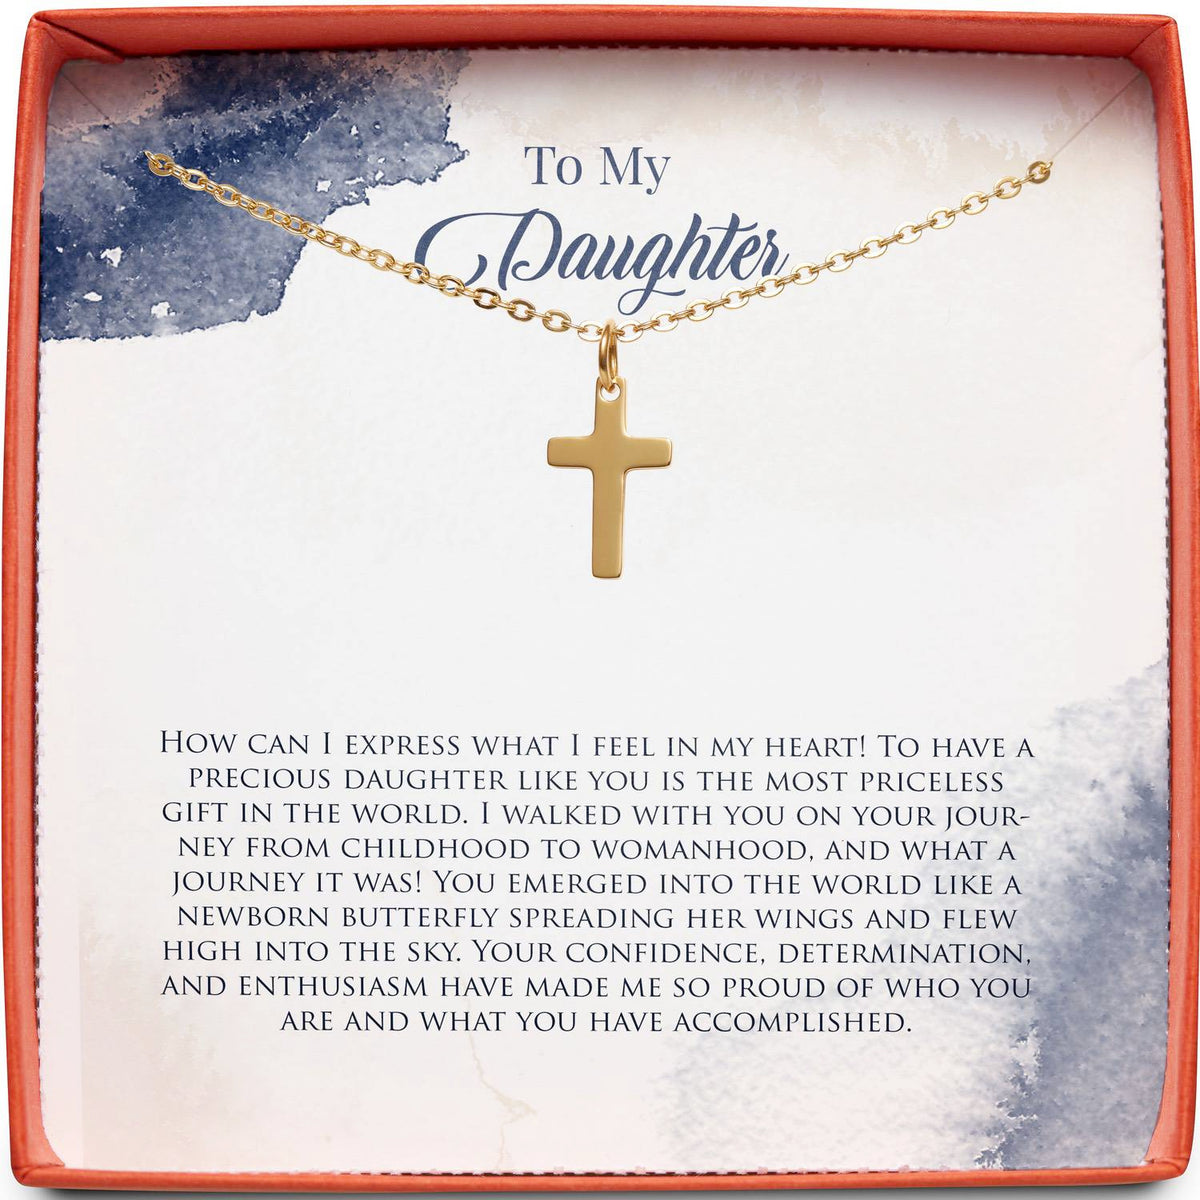 To My Daughter | Precious Daughter Like You | Cross Necklace